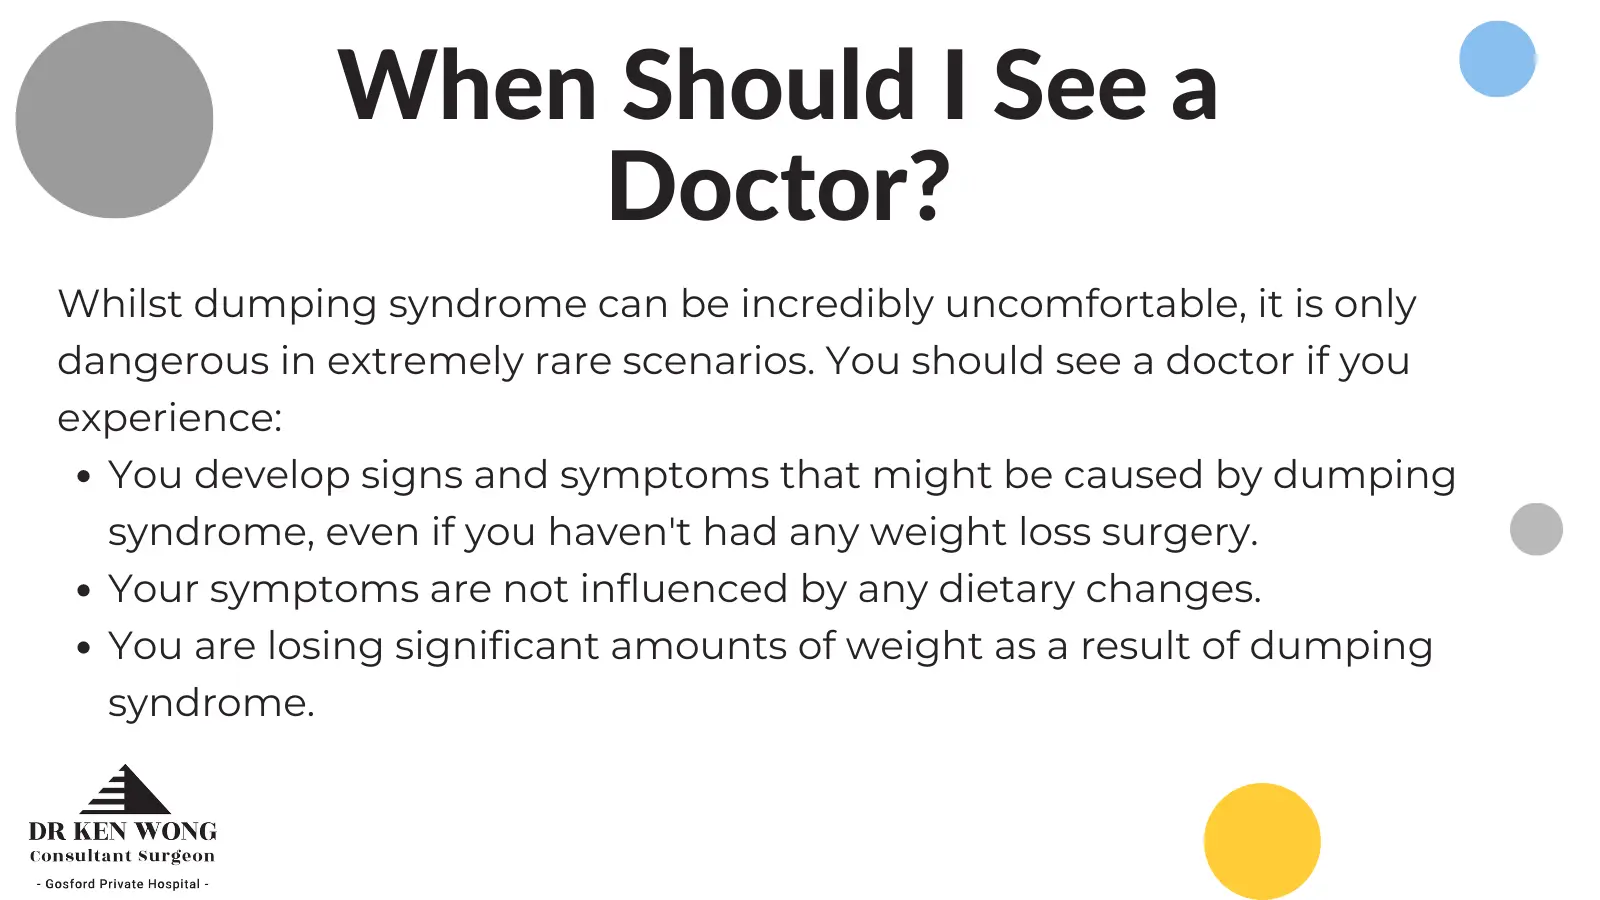 when to see a doctor if you have symptoms of dumping syndrome after gastric sleeve